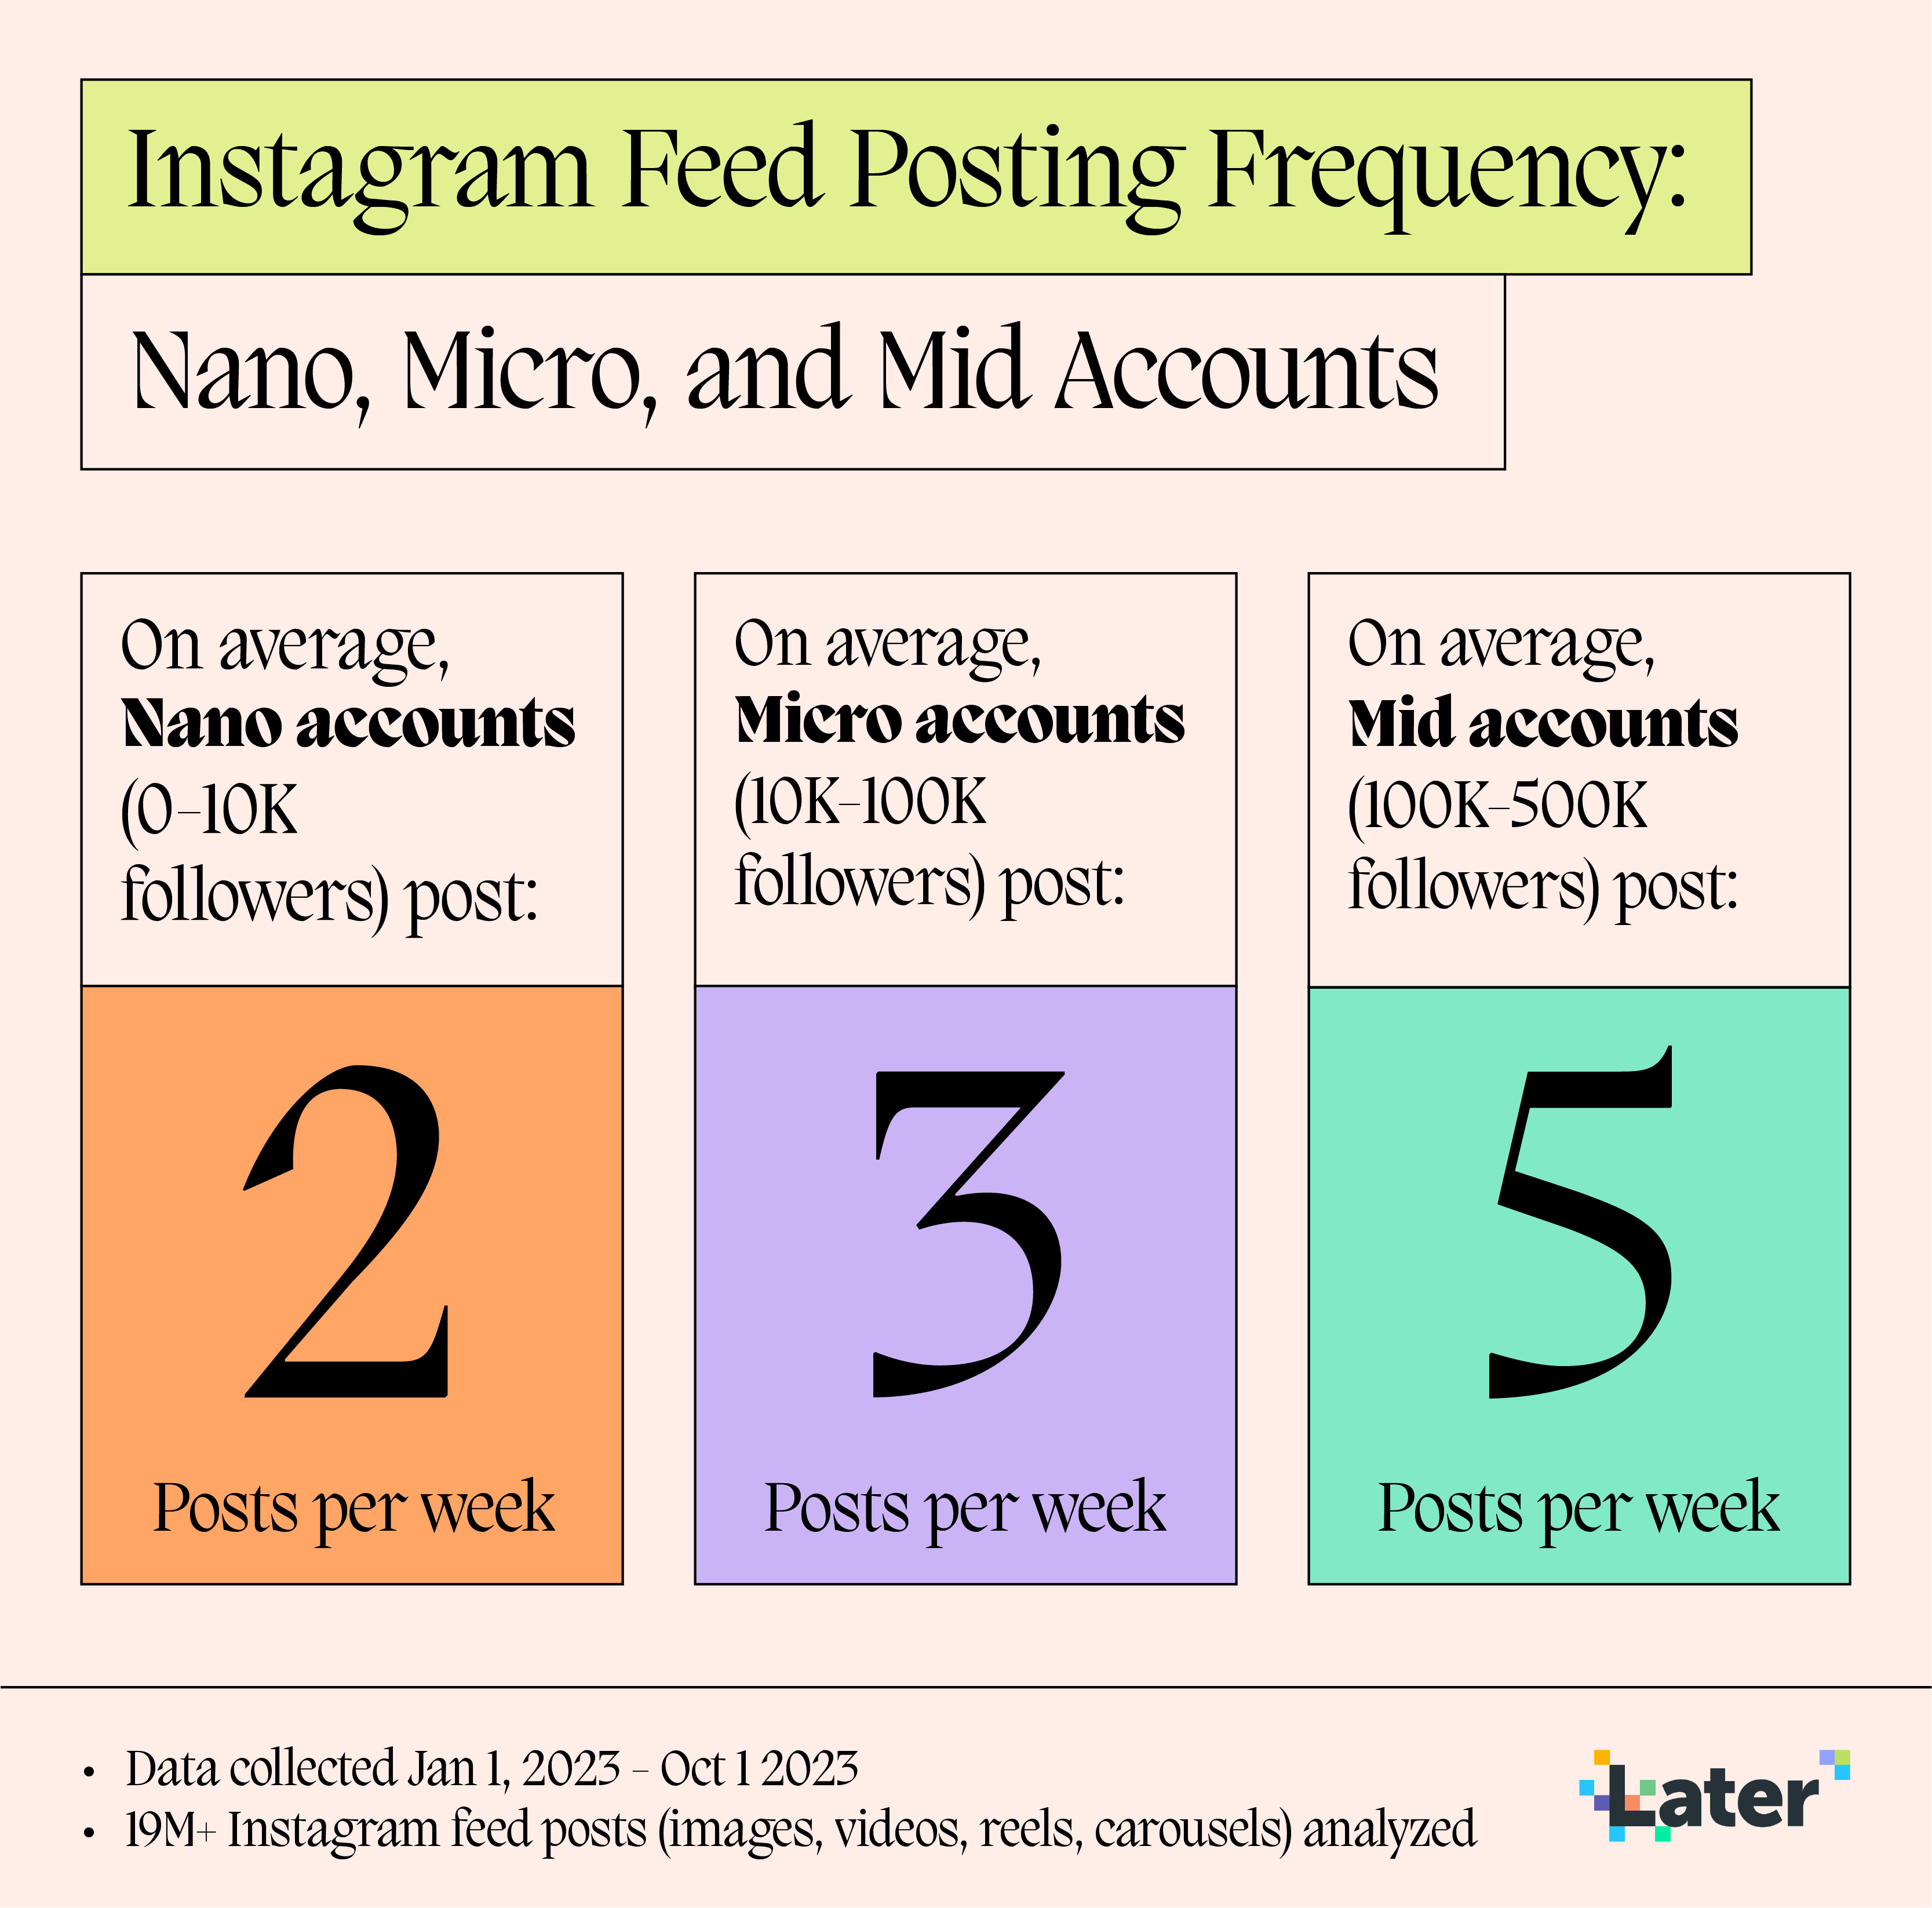 Graphic showing how often Nano, Micro, and Mid accounts post feed posts on Instagram every week